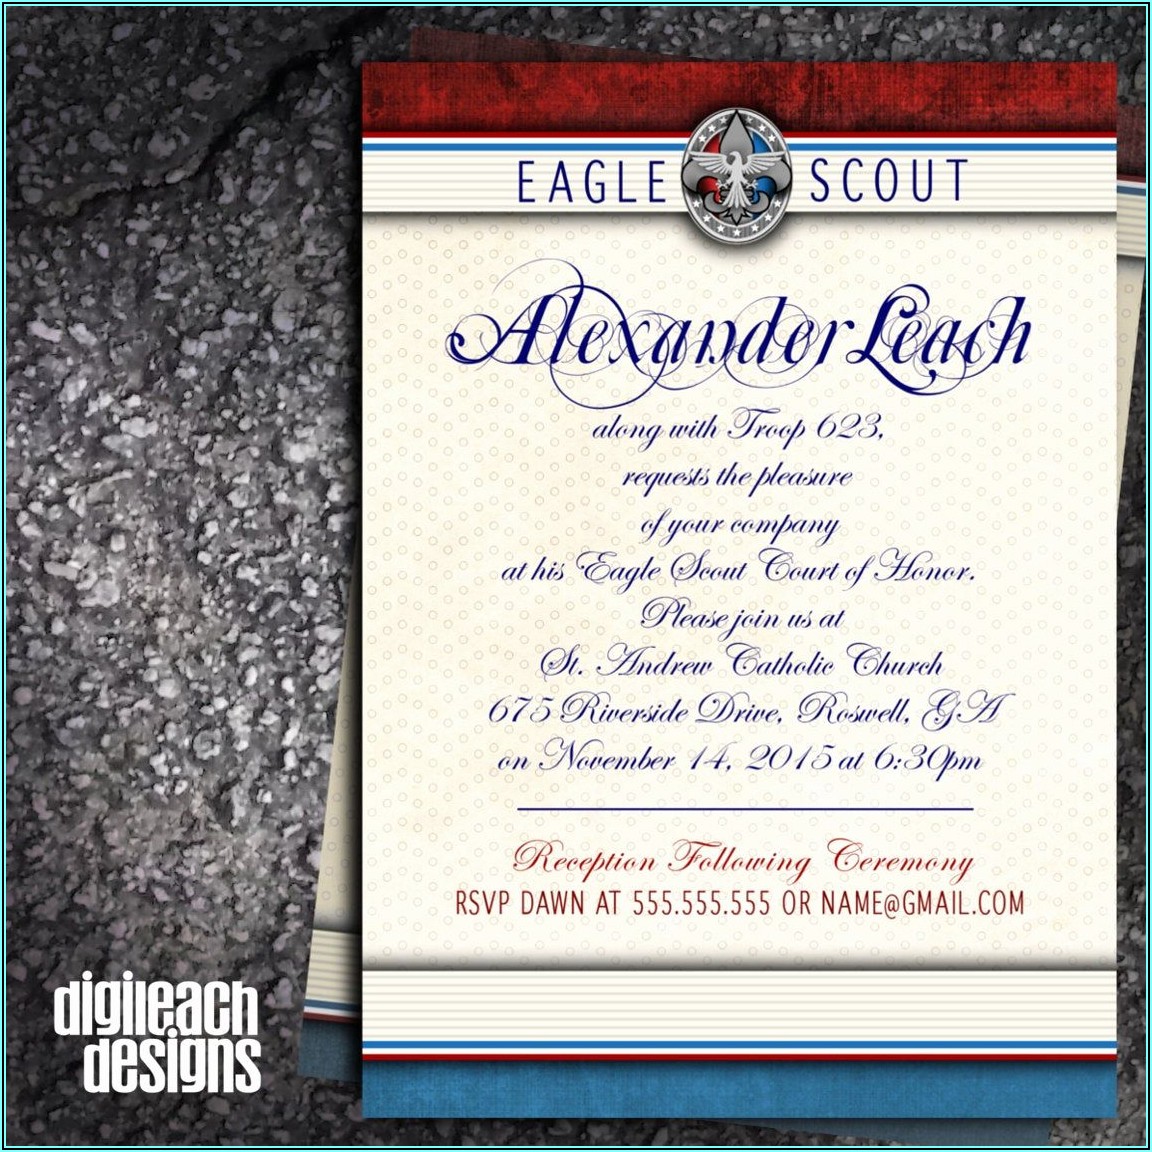 Eagle Scout Court Of Honor Invitation Template Free